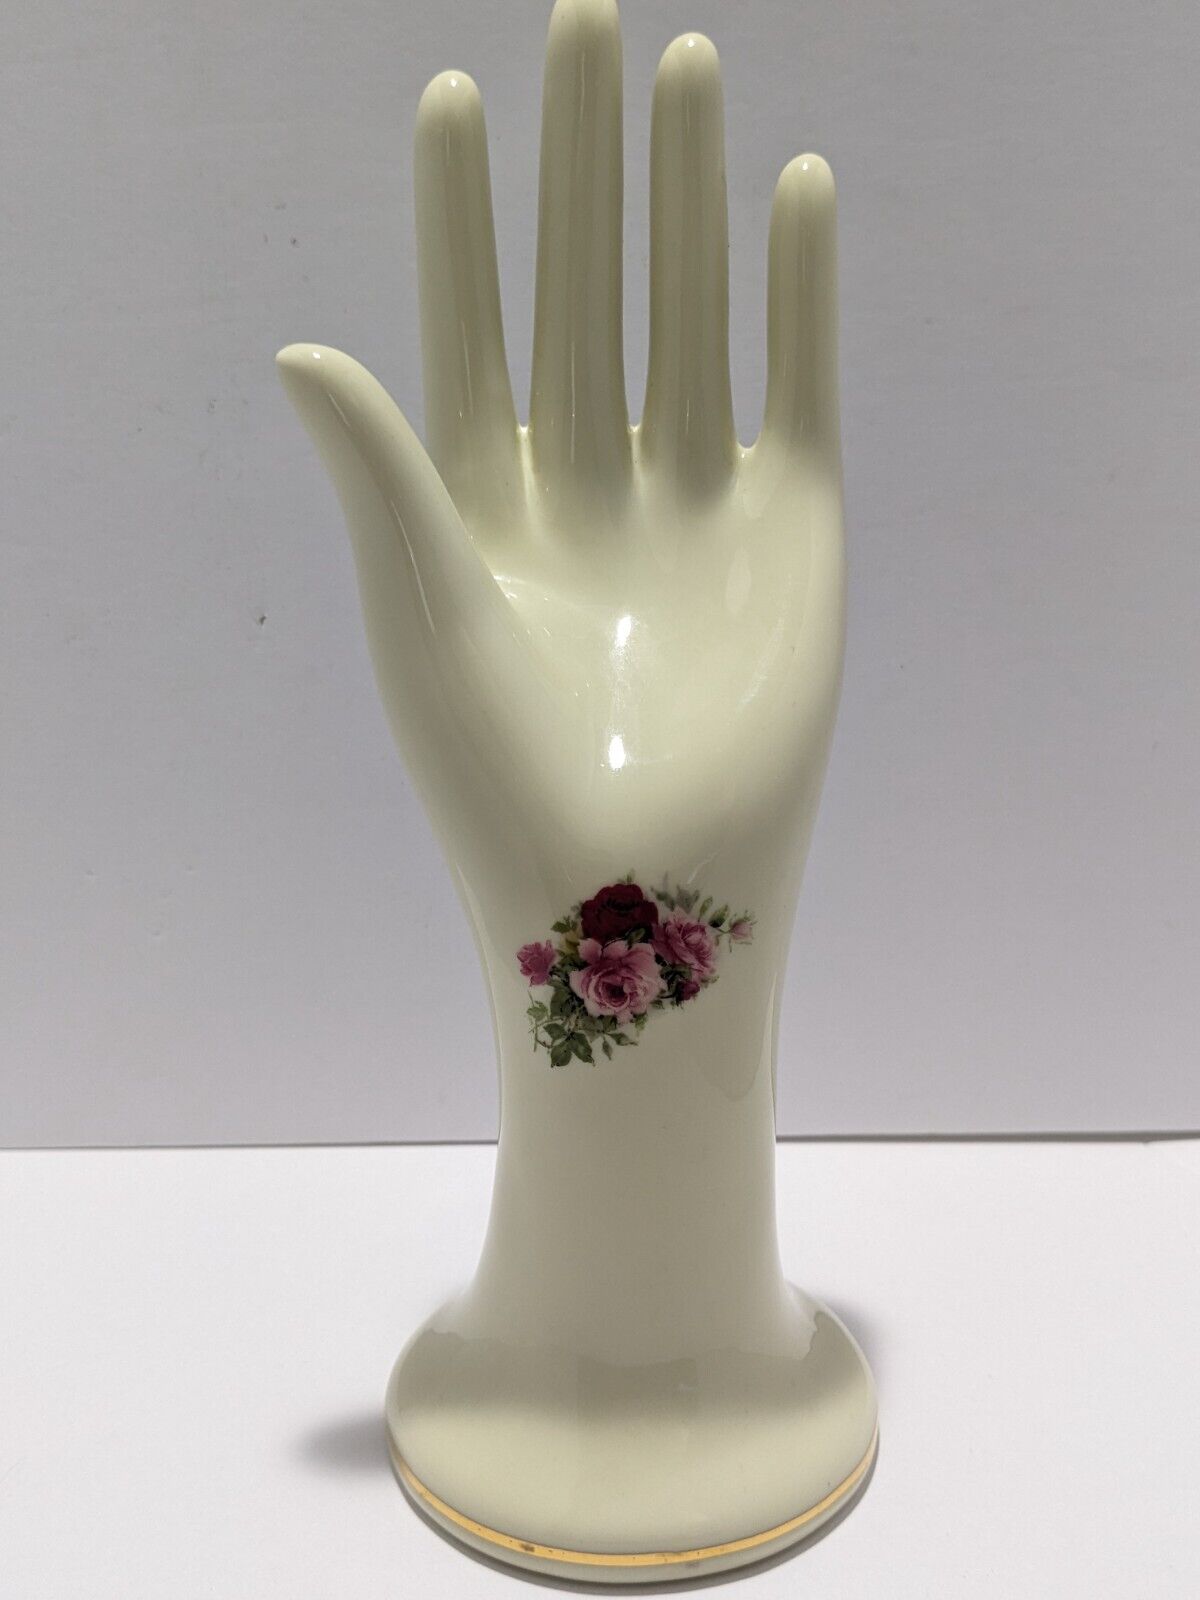 Formalities by Baum Bros Porcelain Hand with Roses and Gold Trim